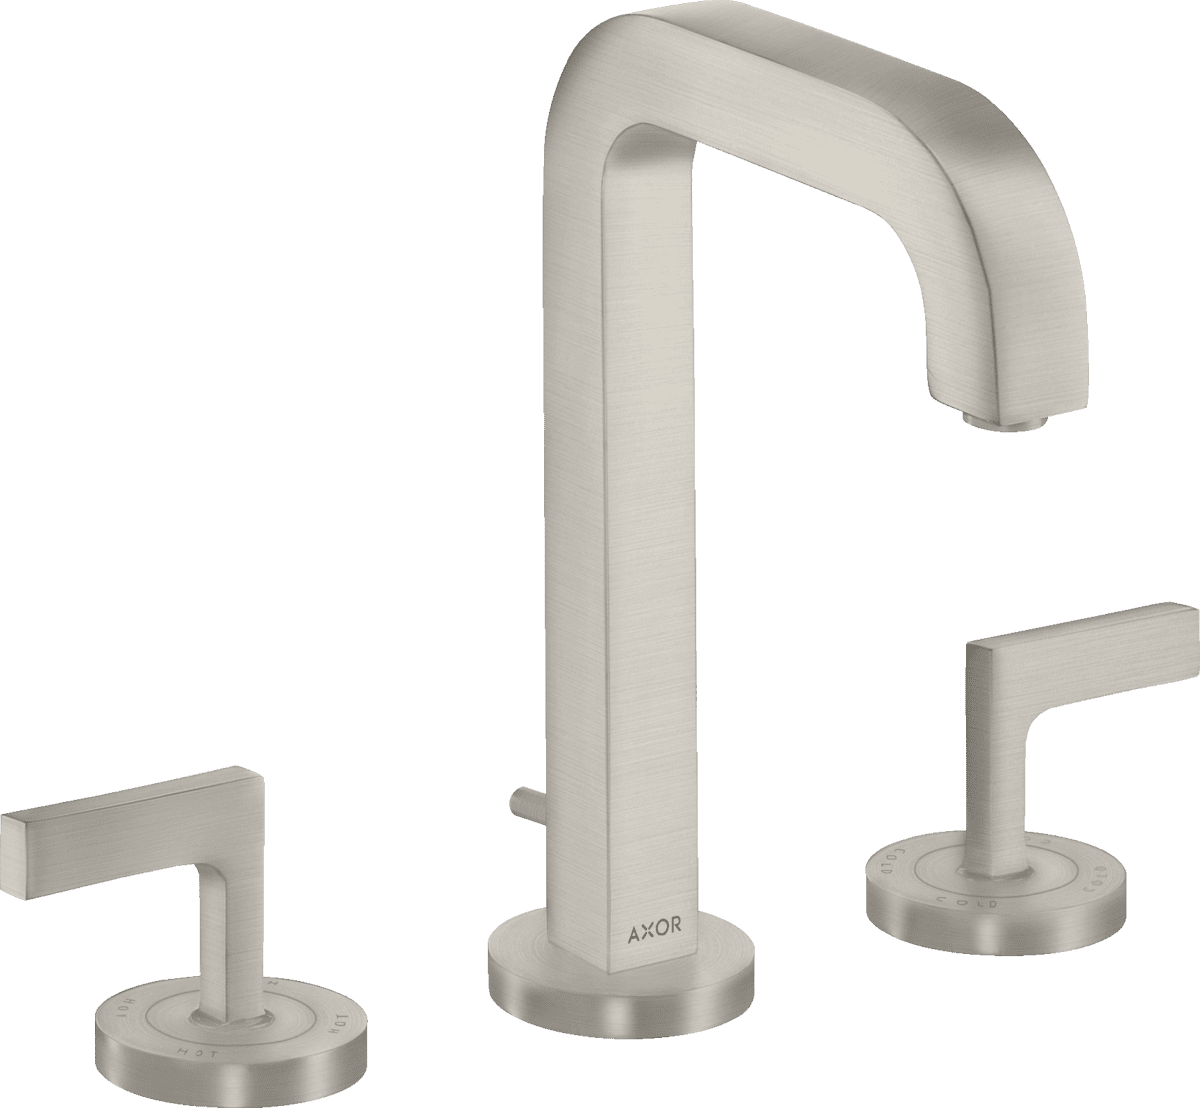 Зображення з  HANSGROHE AXOR Citterio 3-hole basin mixer 170 with spout 140 mm, lever handles, escutcheons and pop-up waste set #39135800 - Stainless Steel Optic